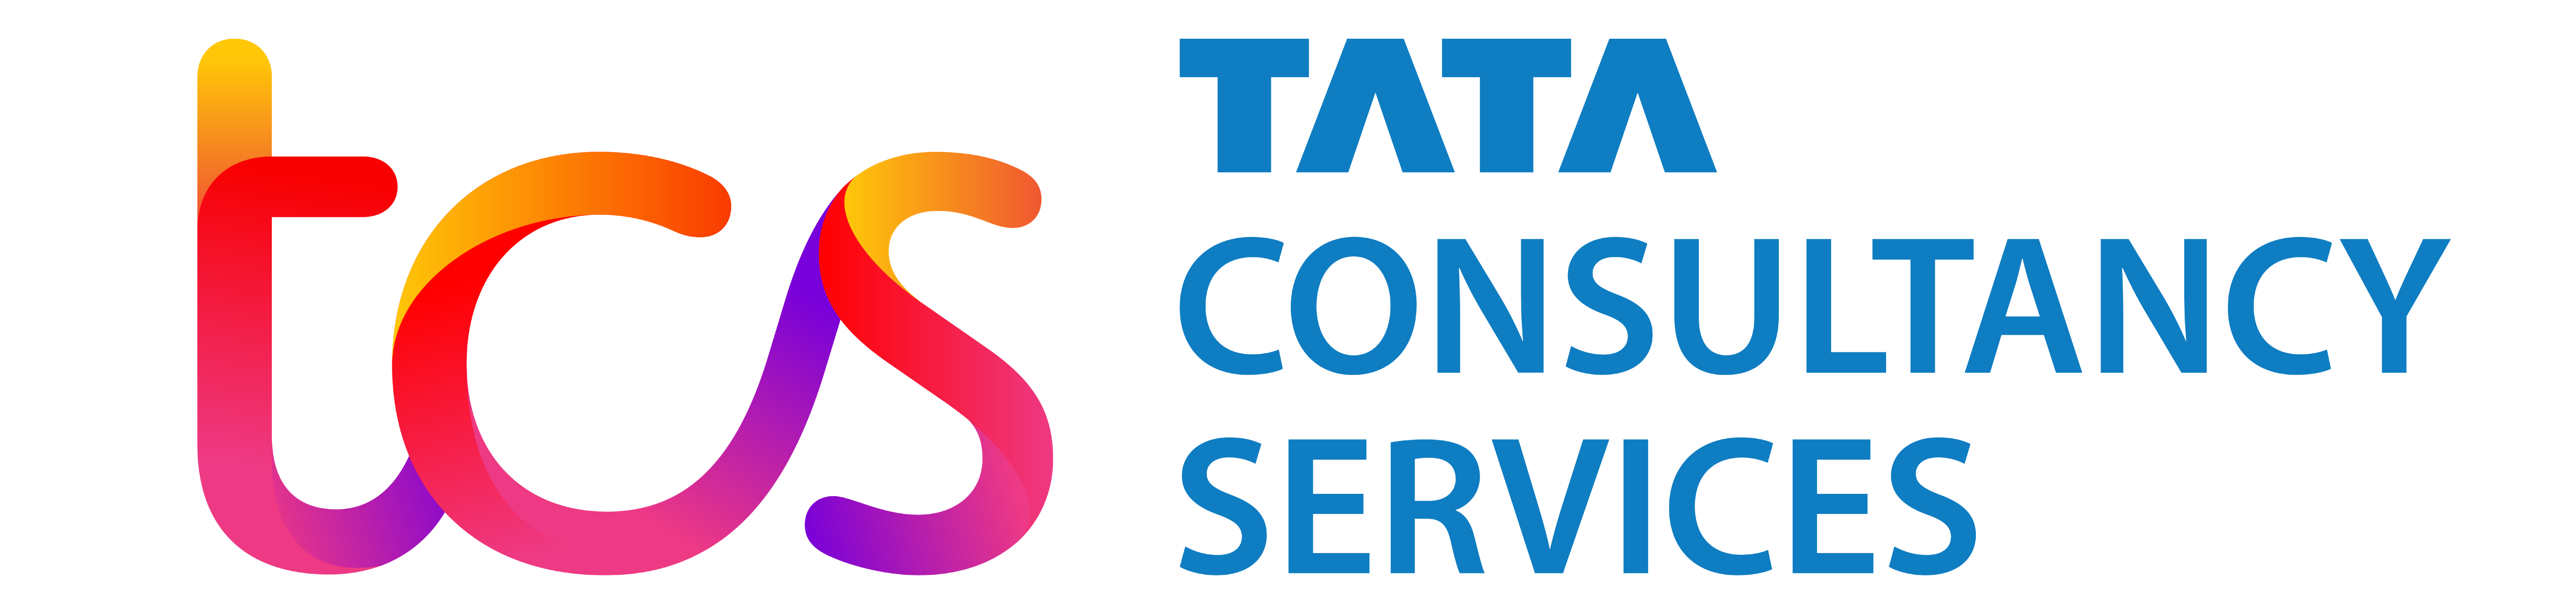 tcs TATA Consultancy Services